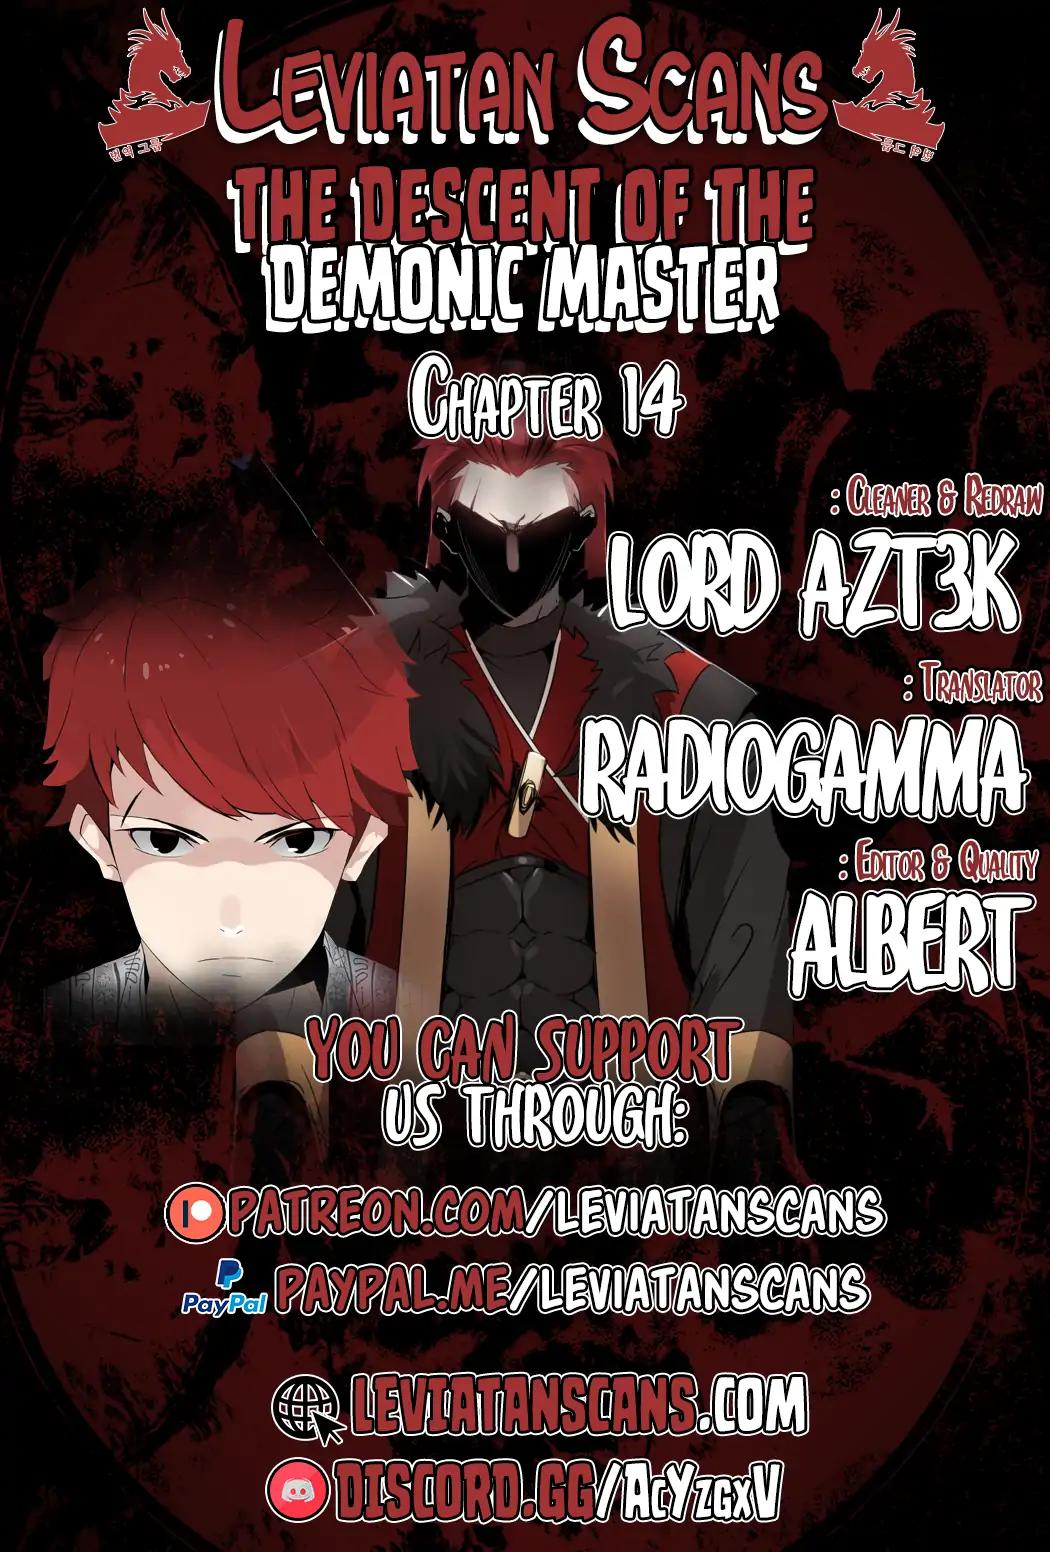 The Descent of the Demonic Master Chapter 14